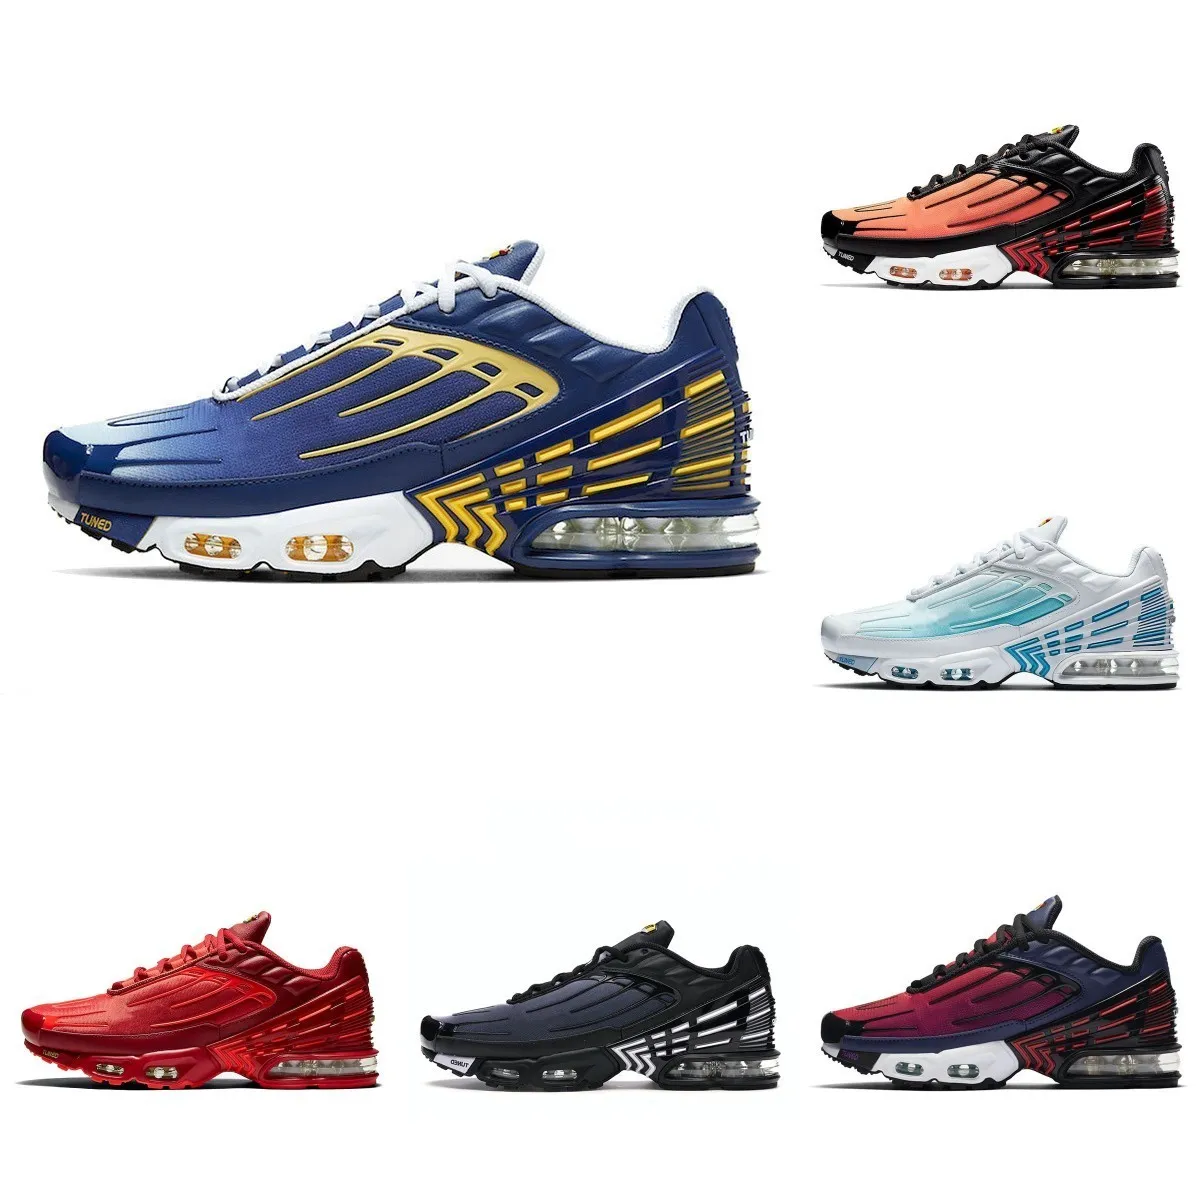 Top Quality Tn Plus 3 Tuned III Men Sports Shoes Deep Royal White Aquamarine Tns Requin Obsidian Hyper Violet Deep Parachute Ghost Green Triple Black Trainer Sneakers